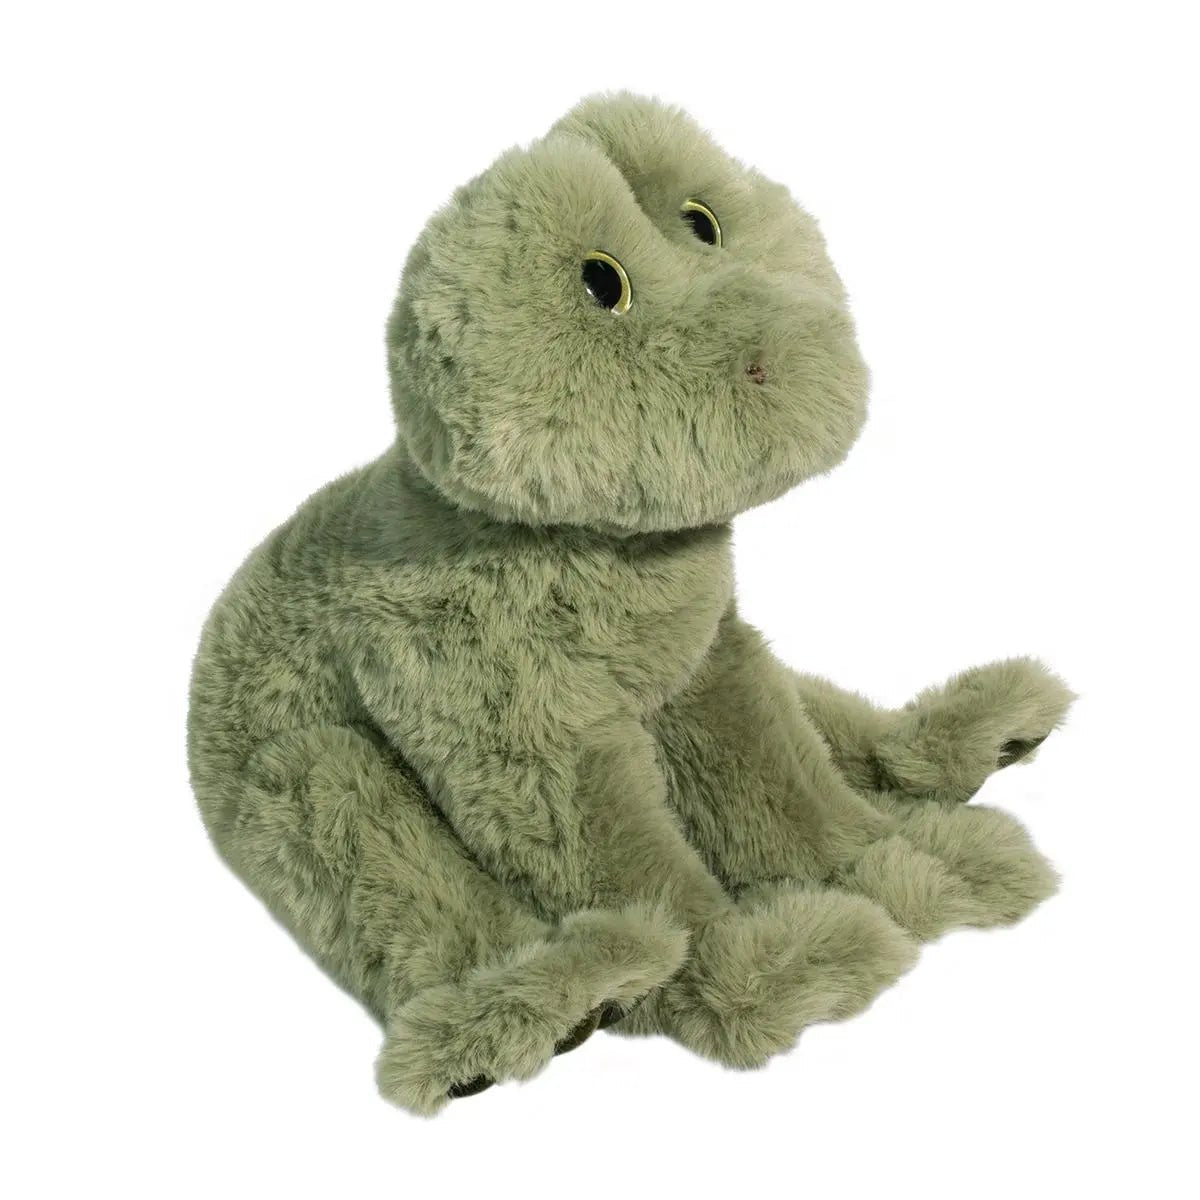 A Finnie Soft Frog plush toy sitting on a white background, ready for cuddles. (Brand Name: Douglas)